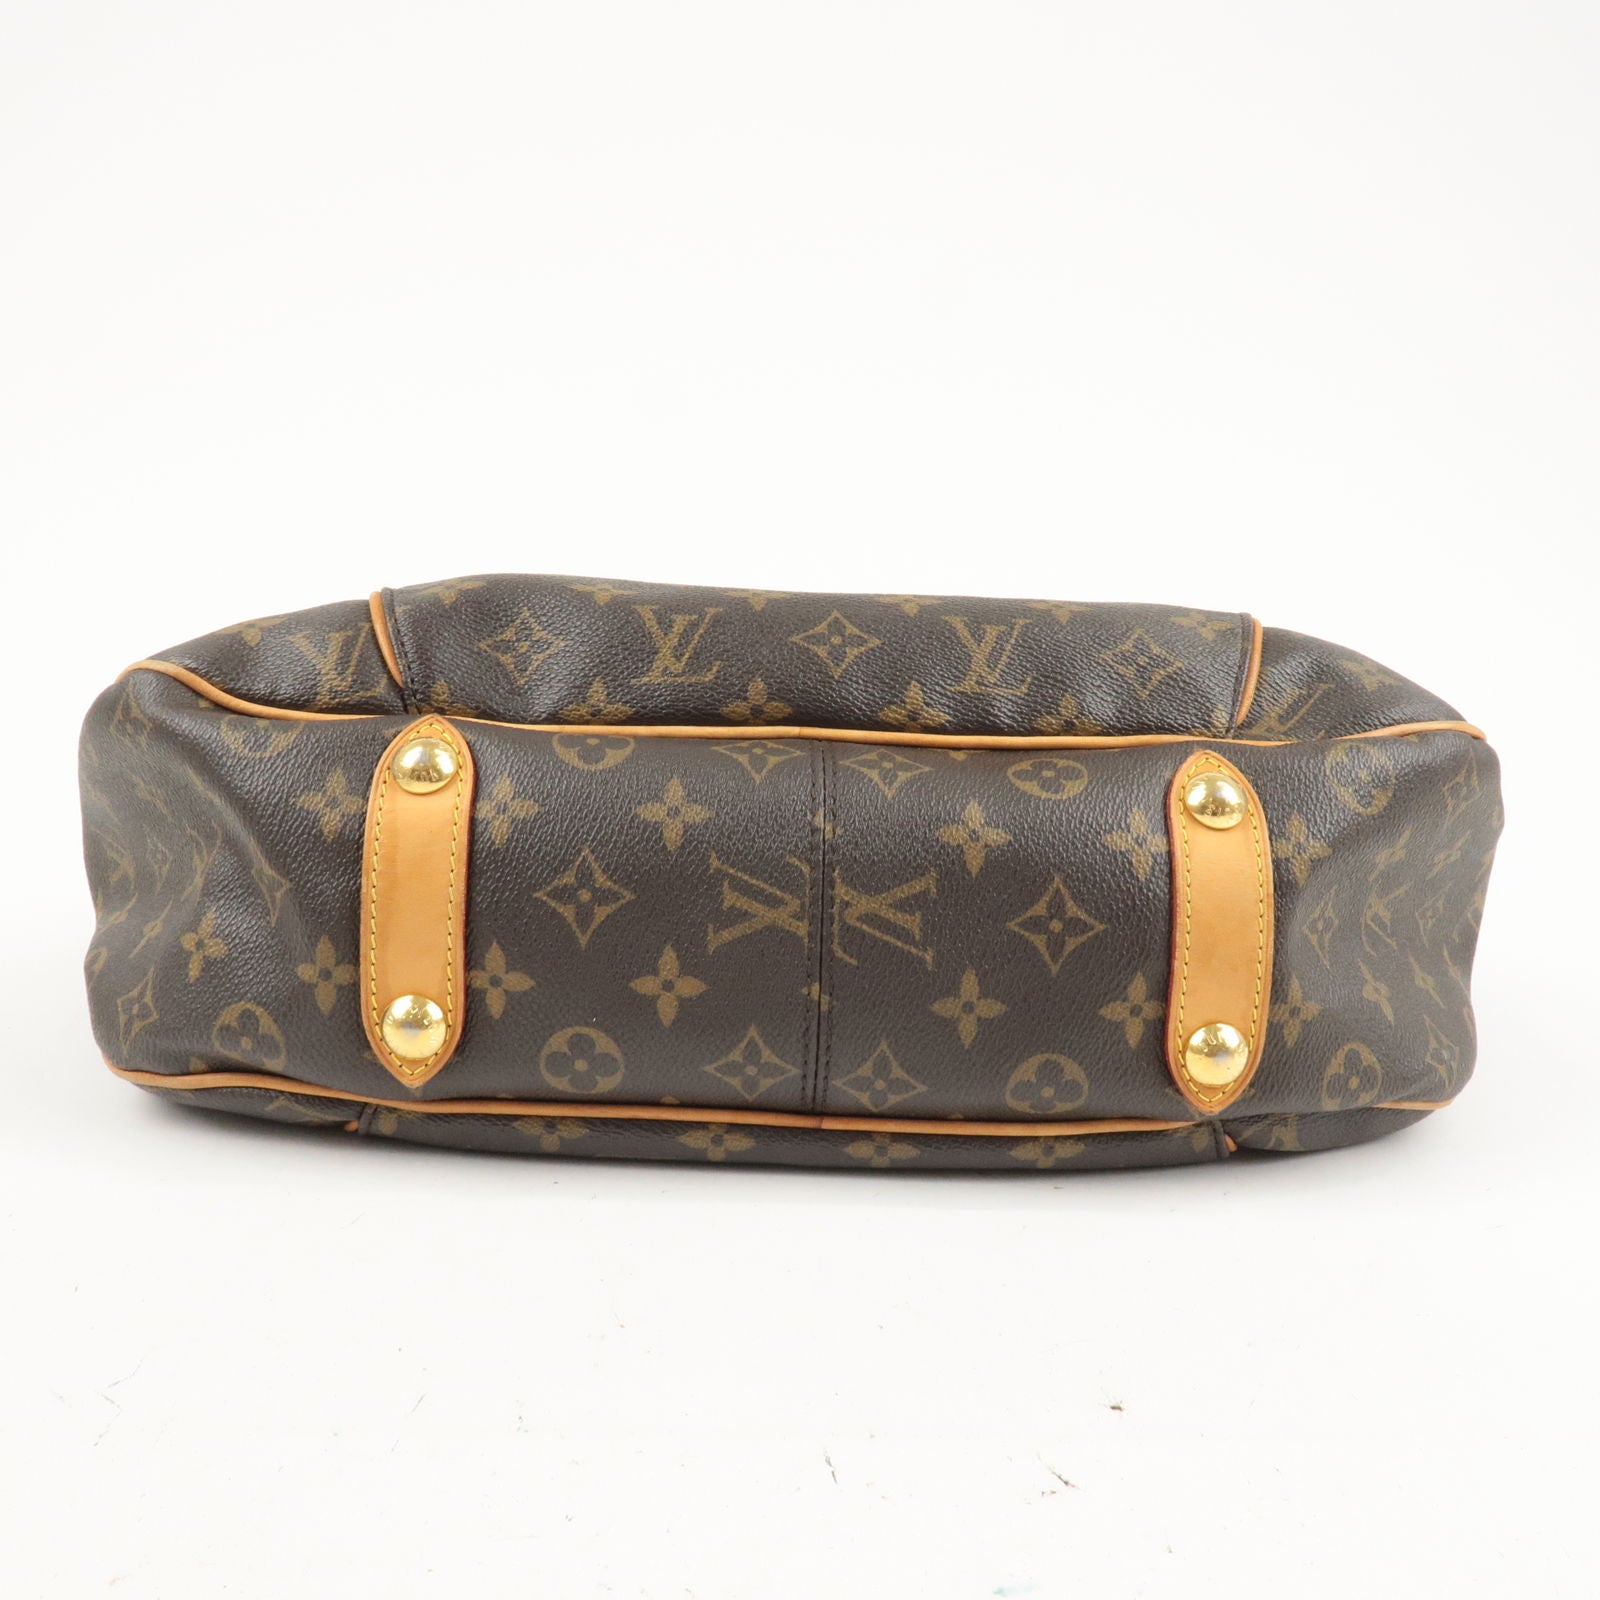 LV Galliera PM M56382 Monogram Canvas with Leather and Gold